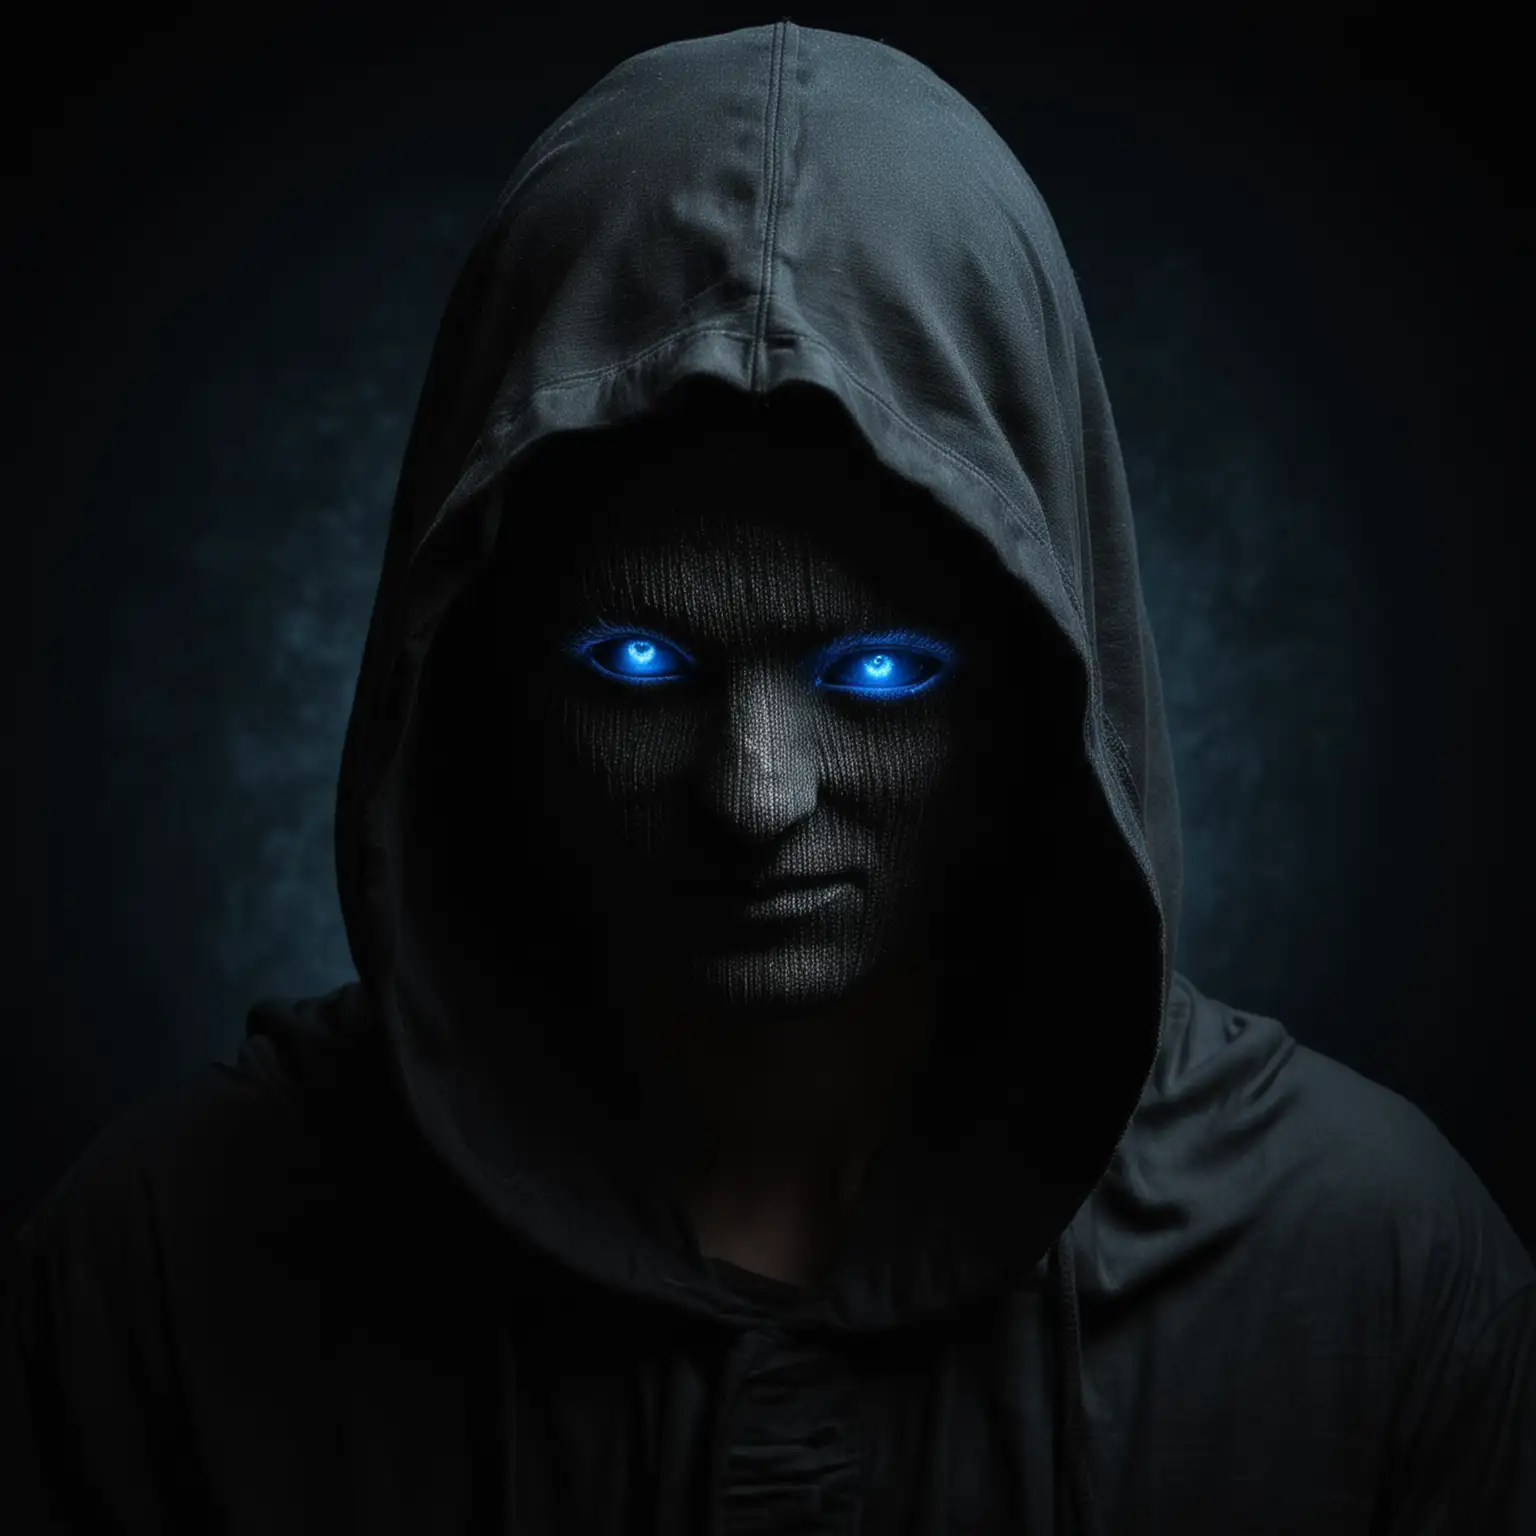 Mysterious Figure with Glowing Blue Eyes in Hooded Cloak